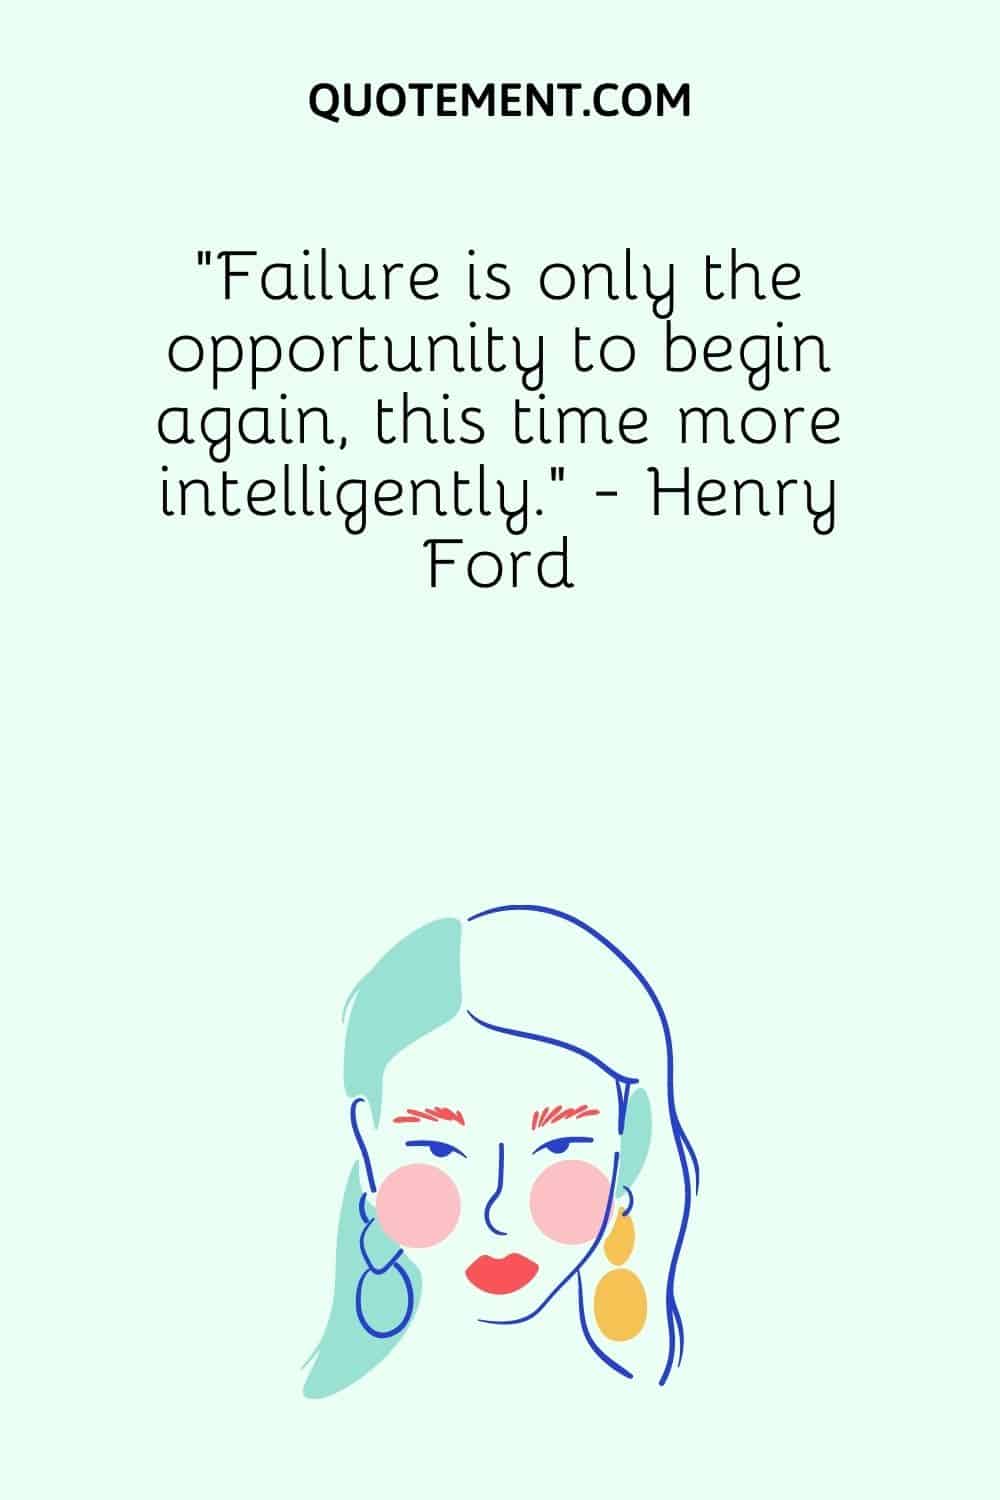 Failure is only the opportunity to begin again, this time more intelligently. - Henry Ford